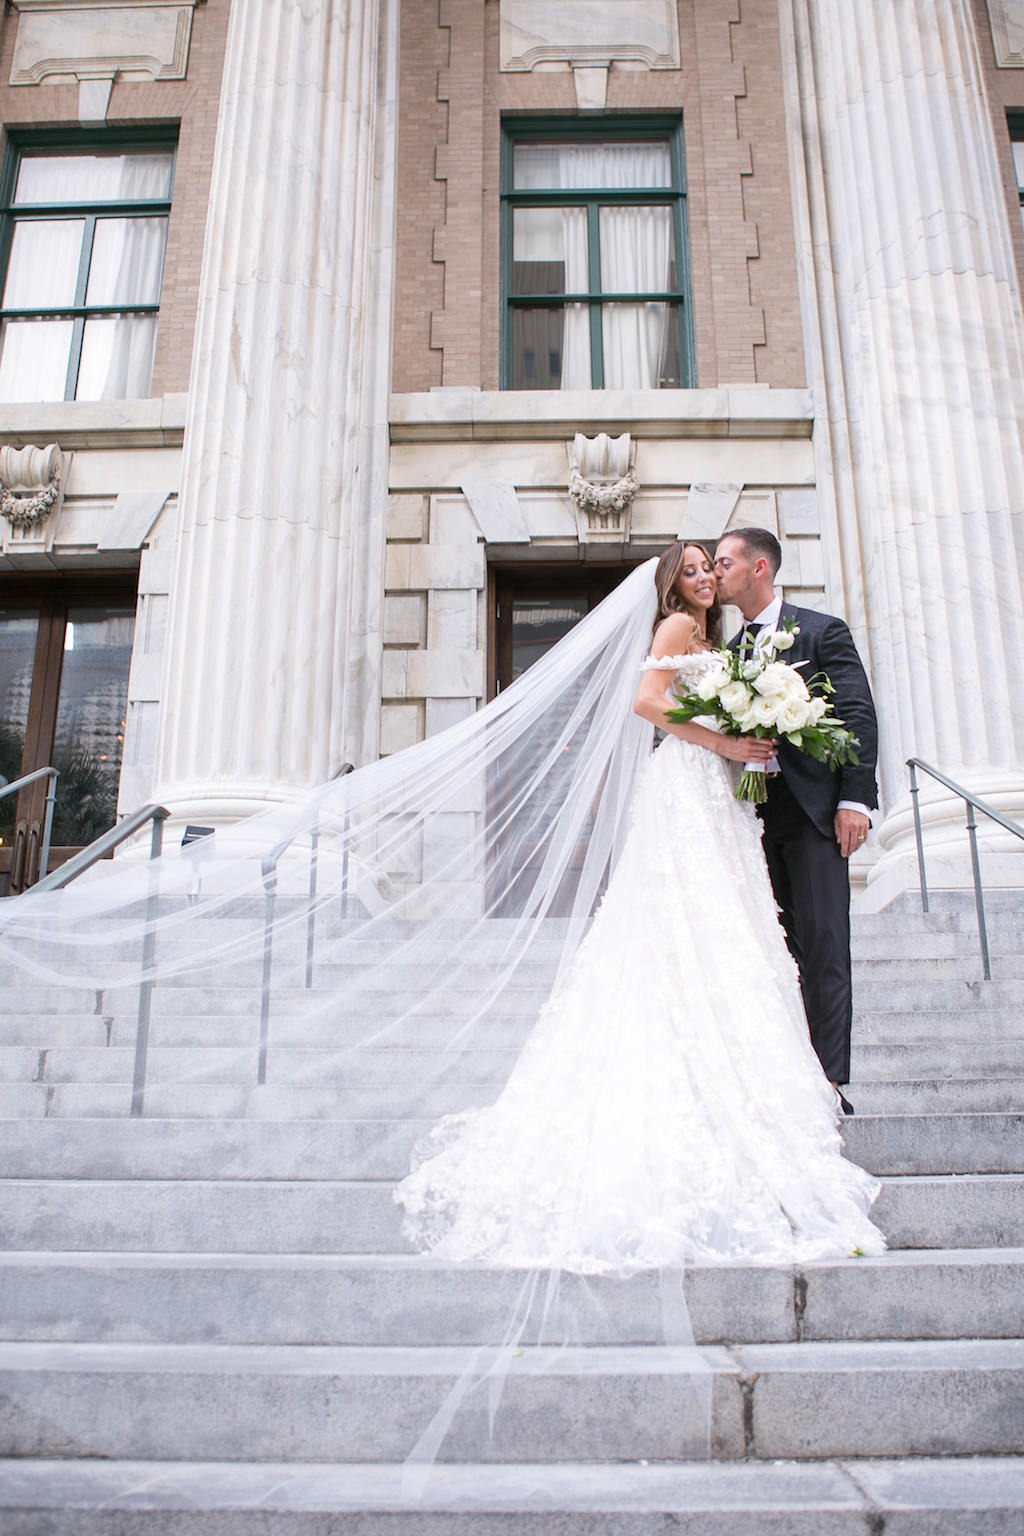 Elegant Florida Bride and Groom Wedding Portrait on Steps of Downtown Tampa Hotel Venue Le Meridien and Veil Blowing in Wind | Tampa Bay Wedding Photographer Carrie Wildes Photography | Tampa Dress Shop Isabel O'Neil Bridal Collection